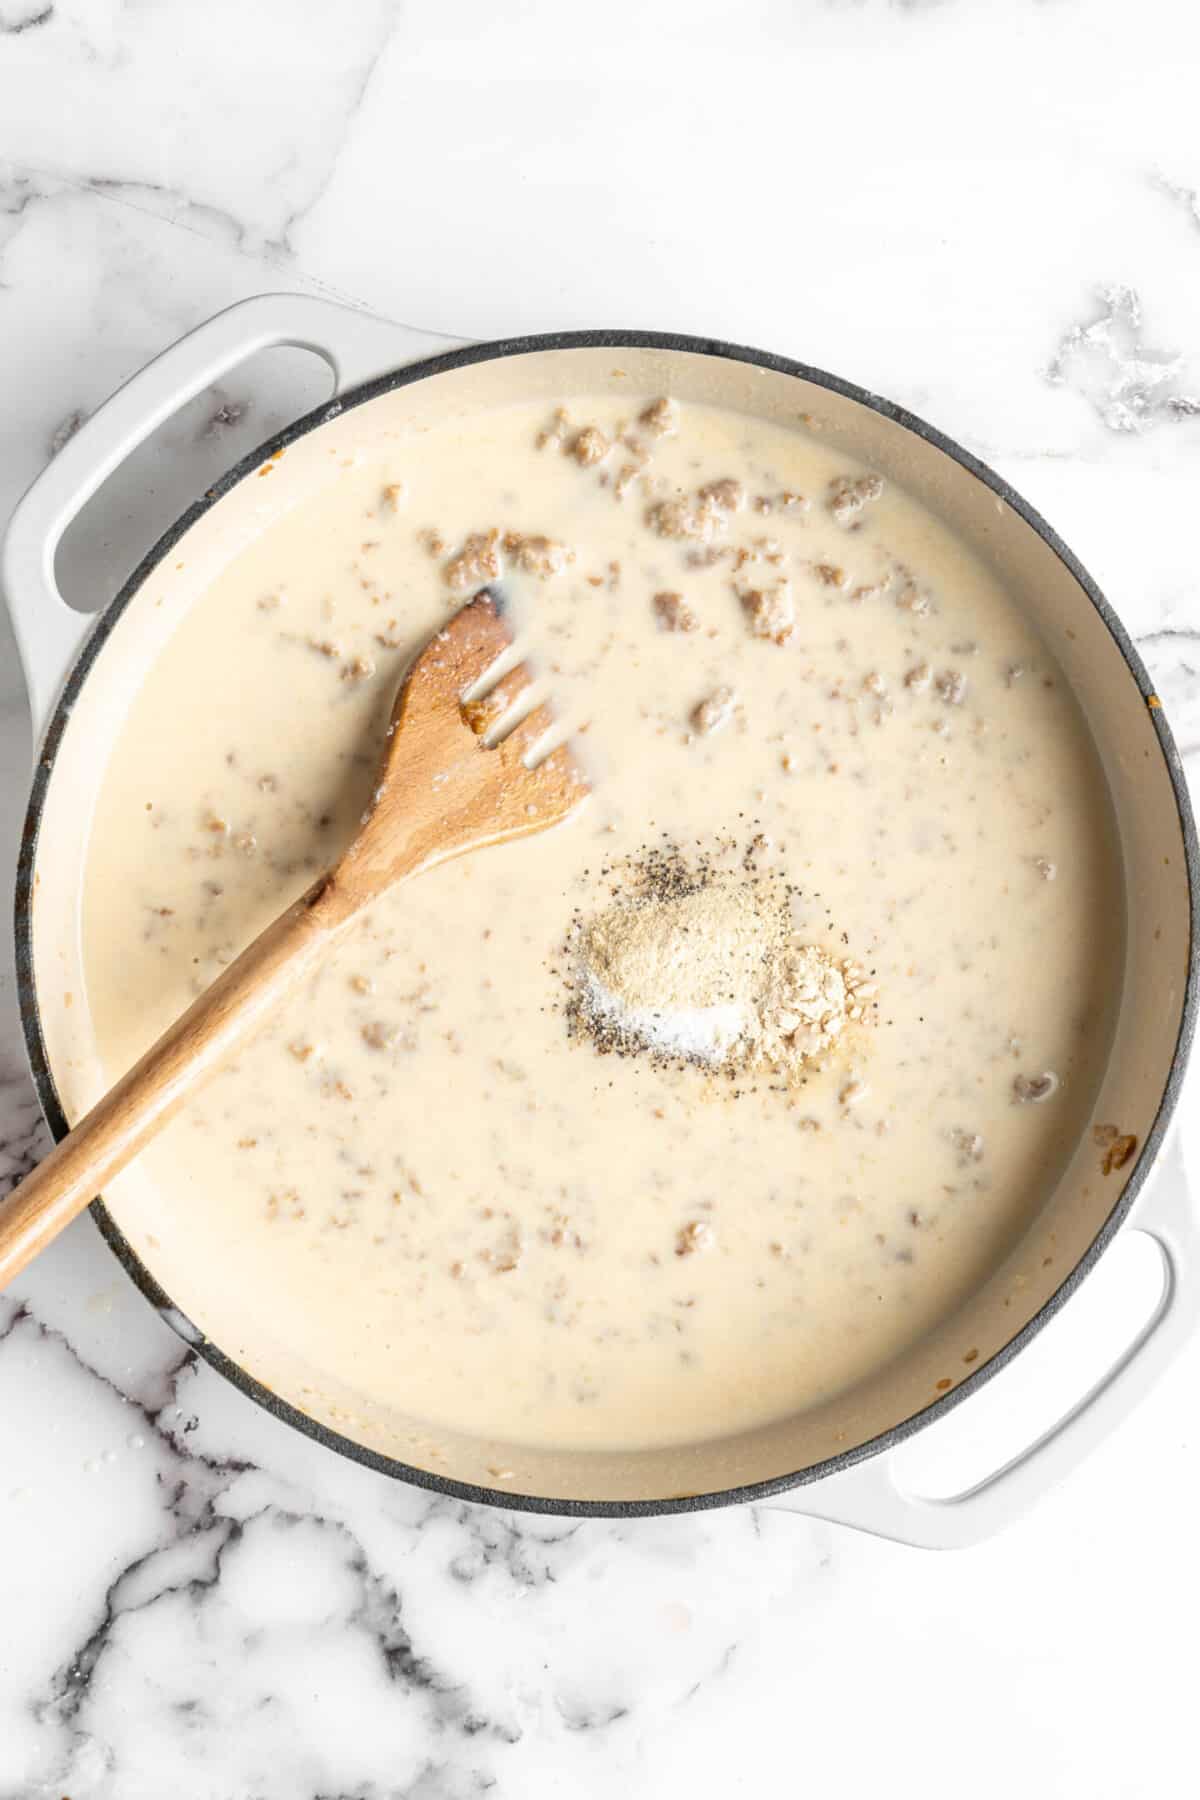 A very wet gravy in a dutch oven with a pile of seasonings on top, and a slotted wooden spoon